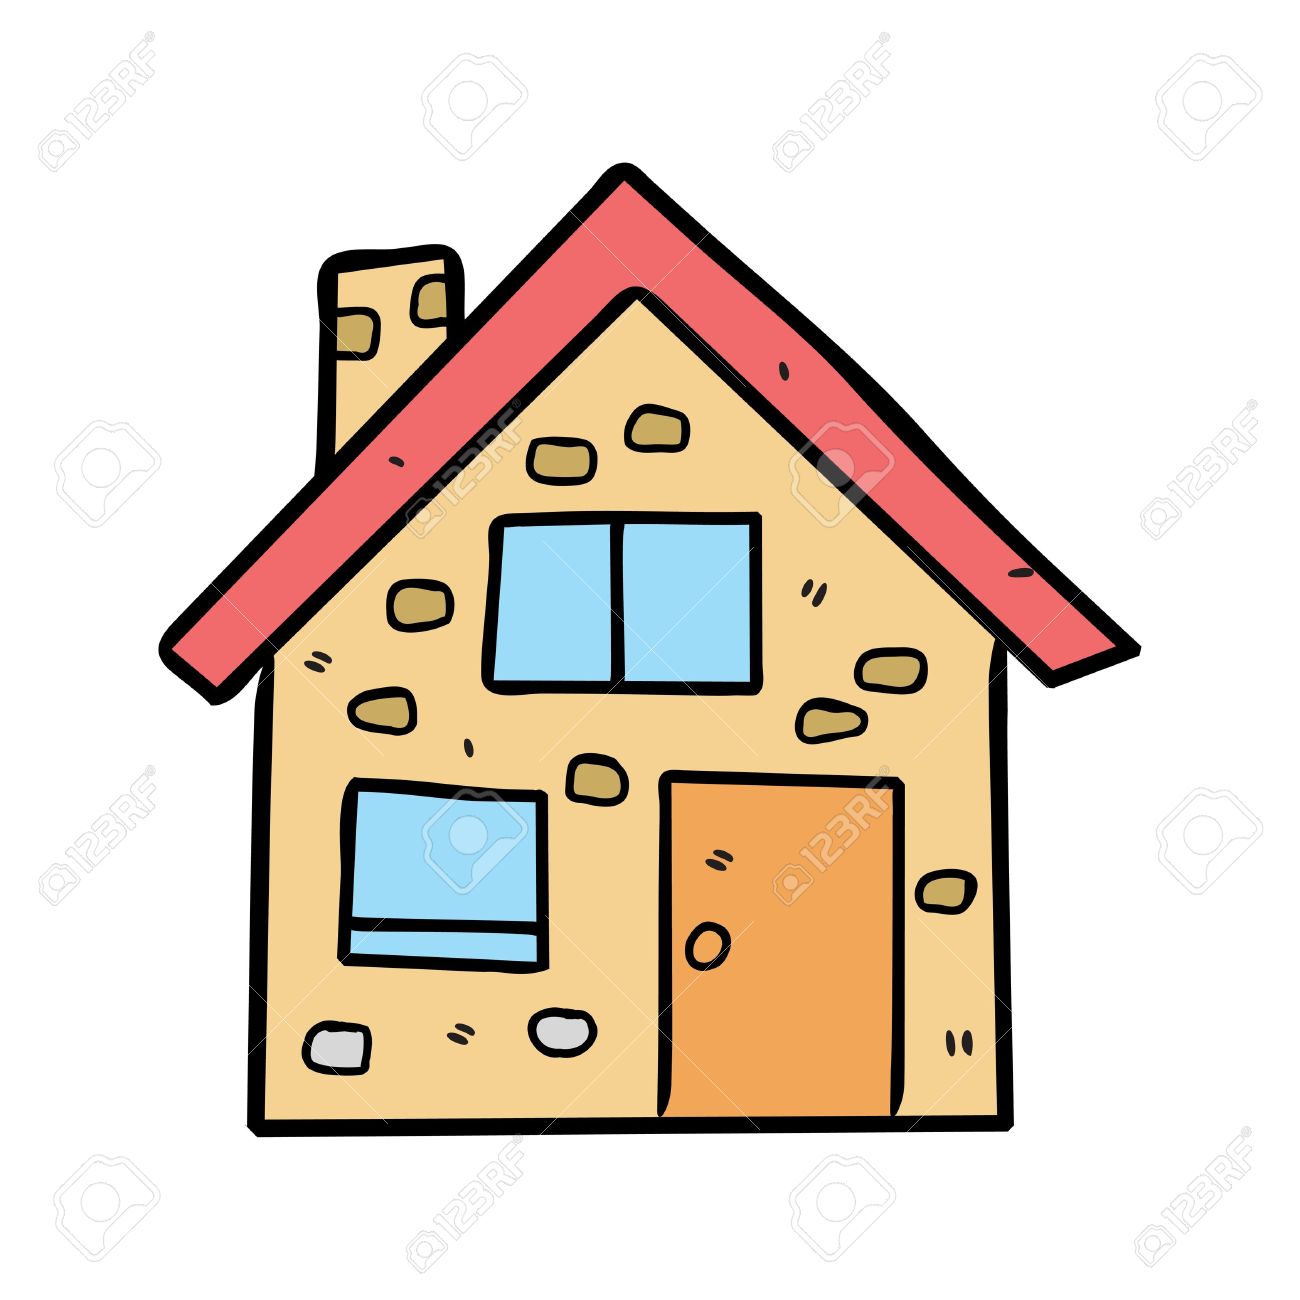 House images clipart.